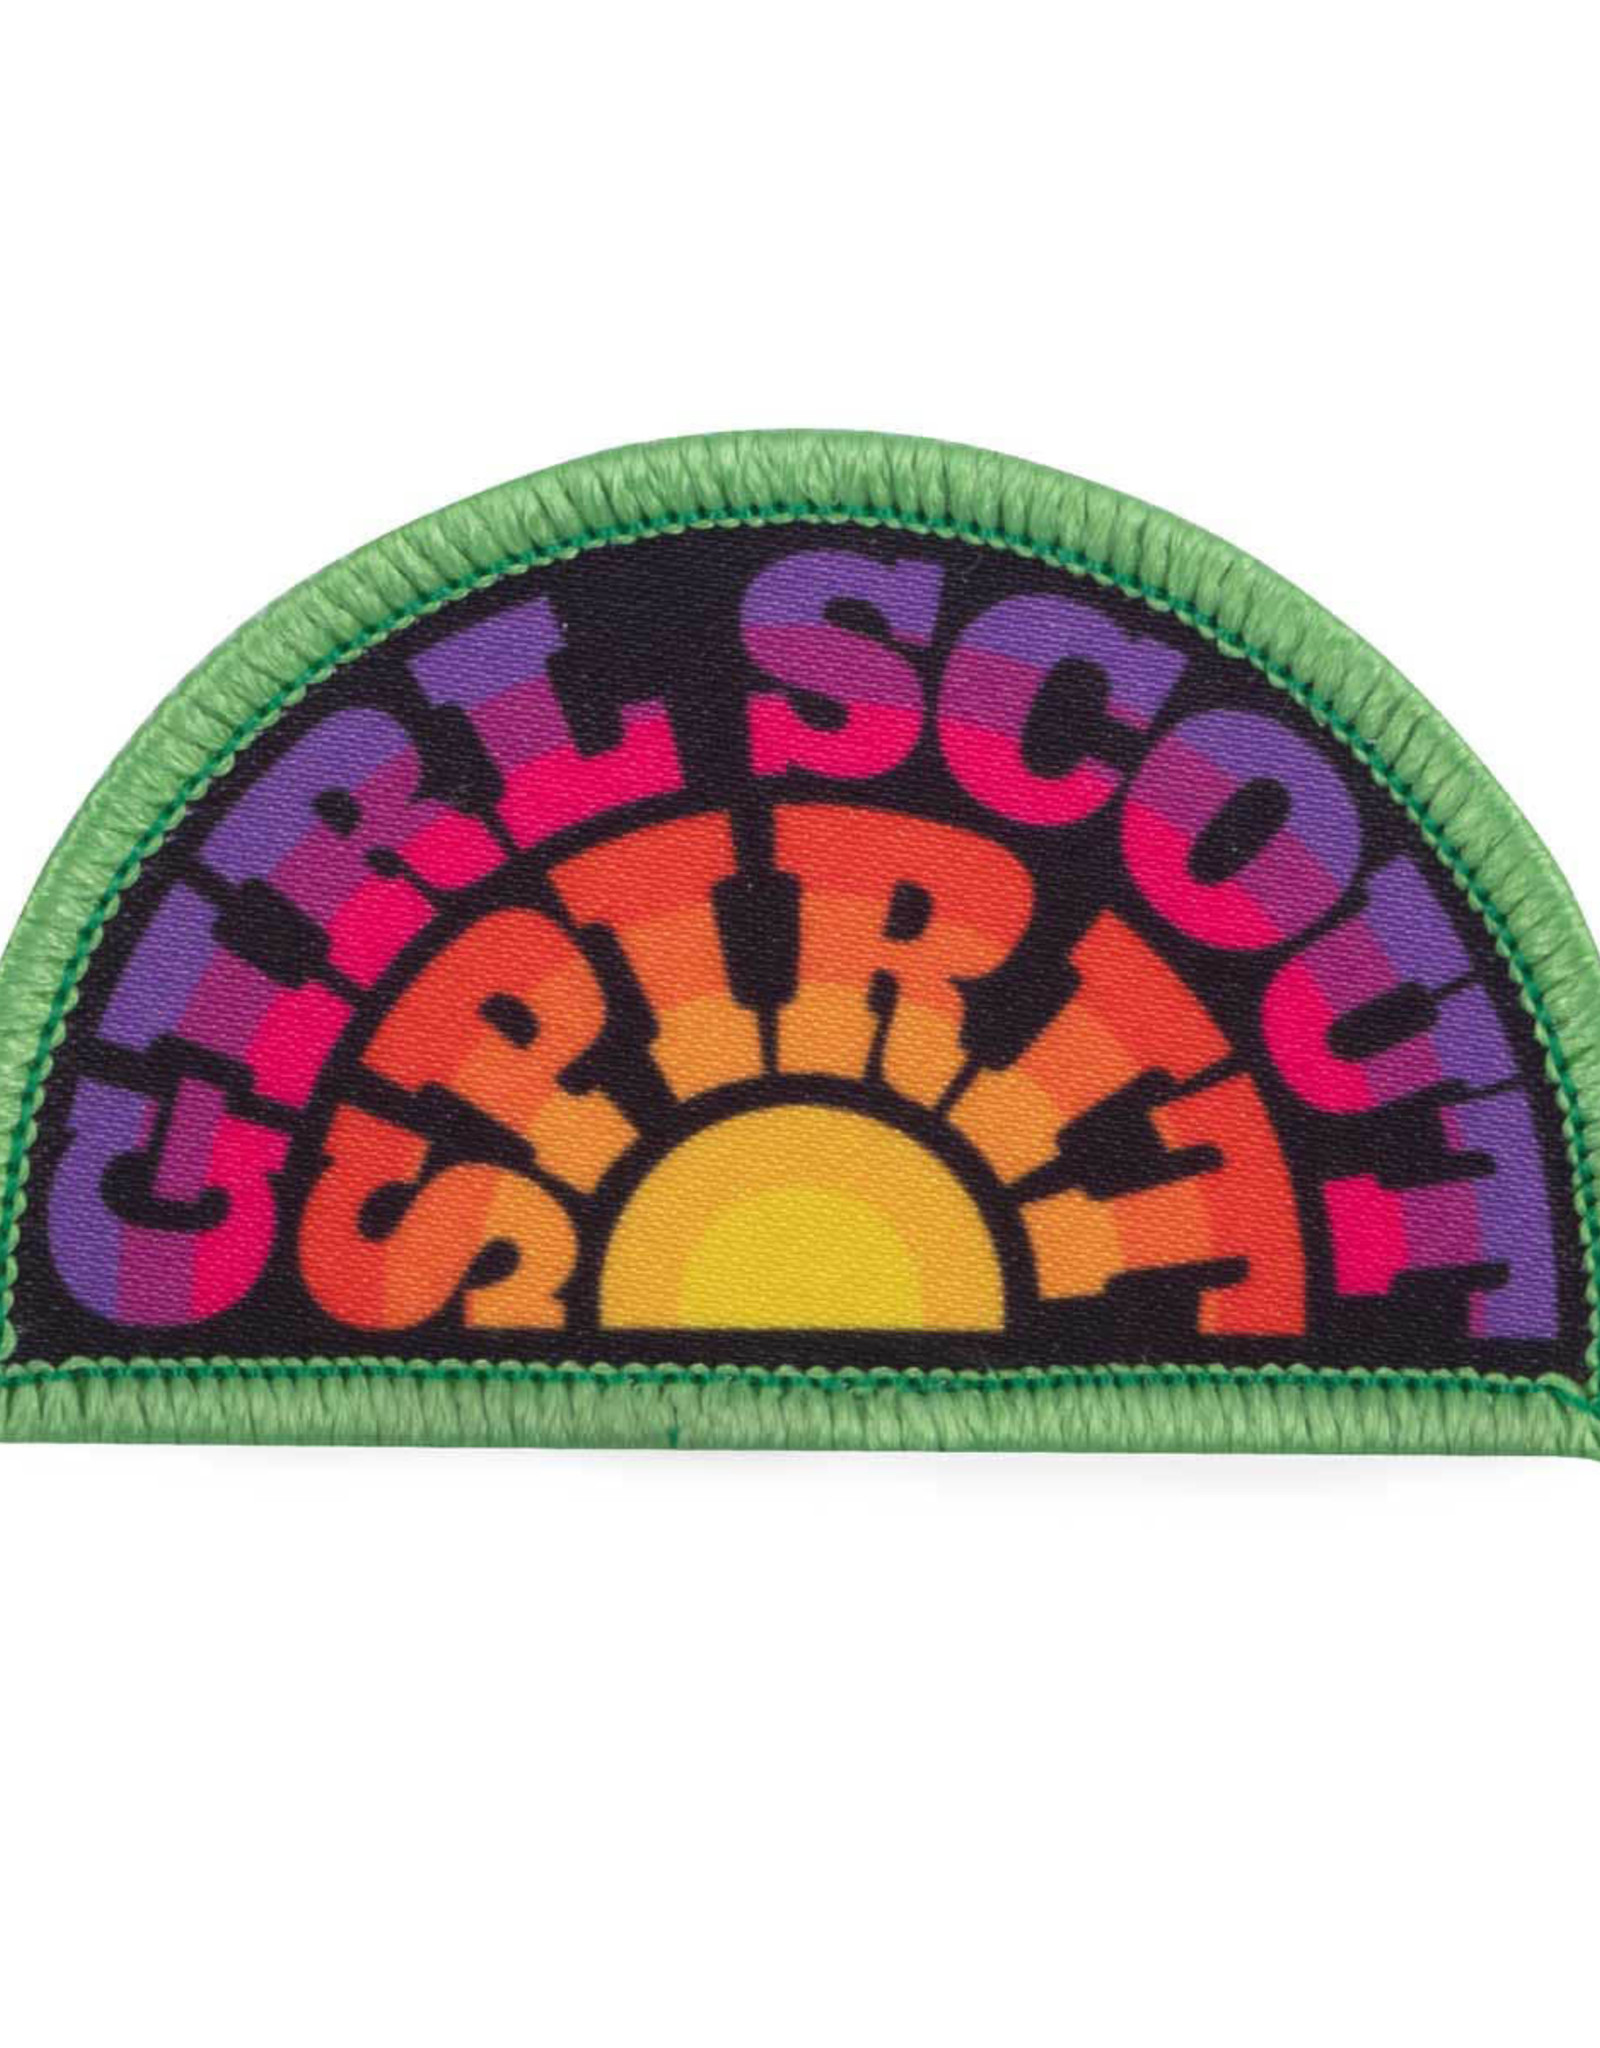 Girl Scout Spirit Sunset Patch